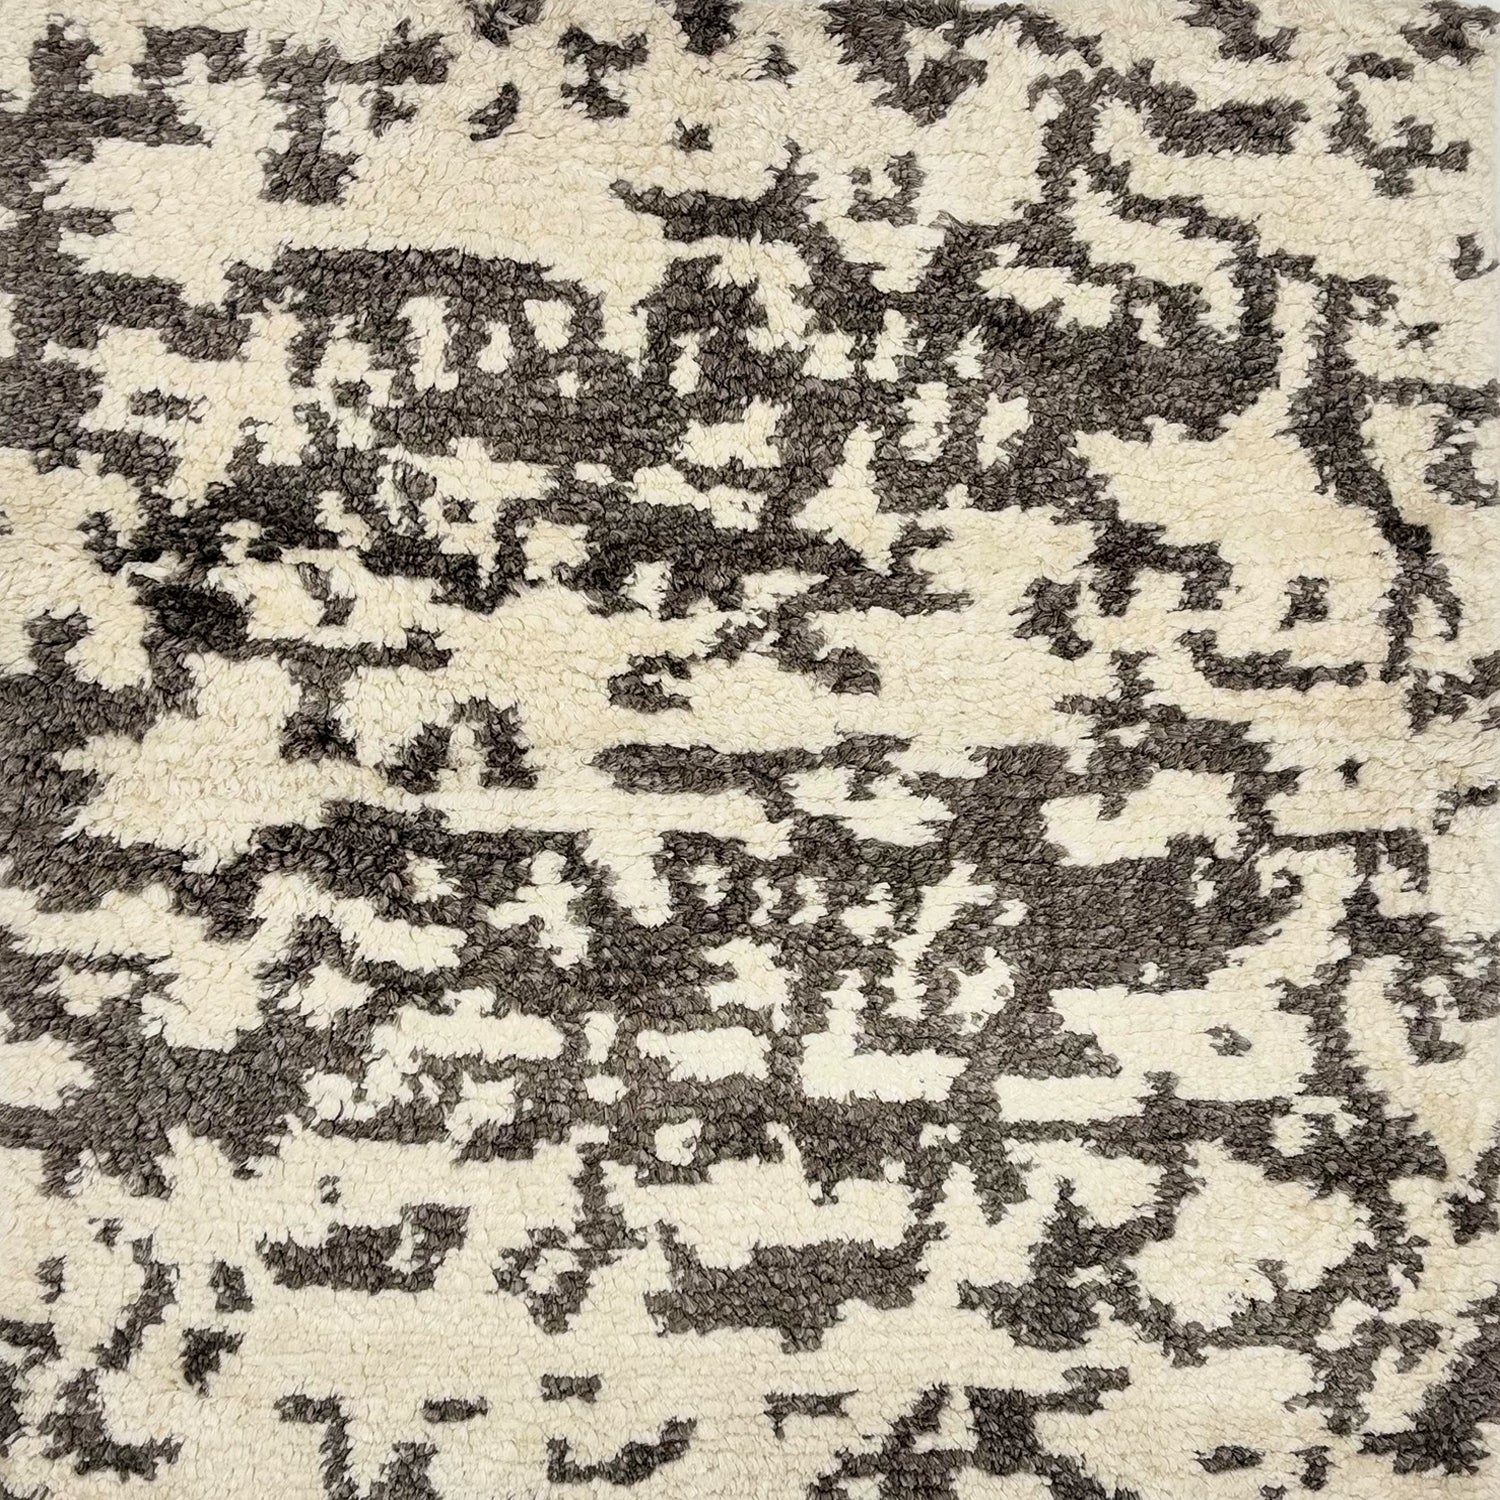 Detail of a silk rug in cream and charcoal in an abstract textural pattern.